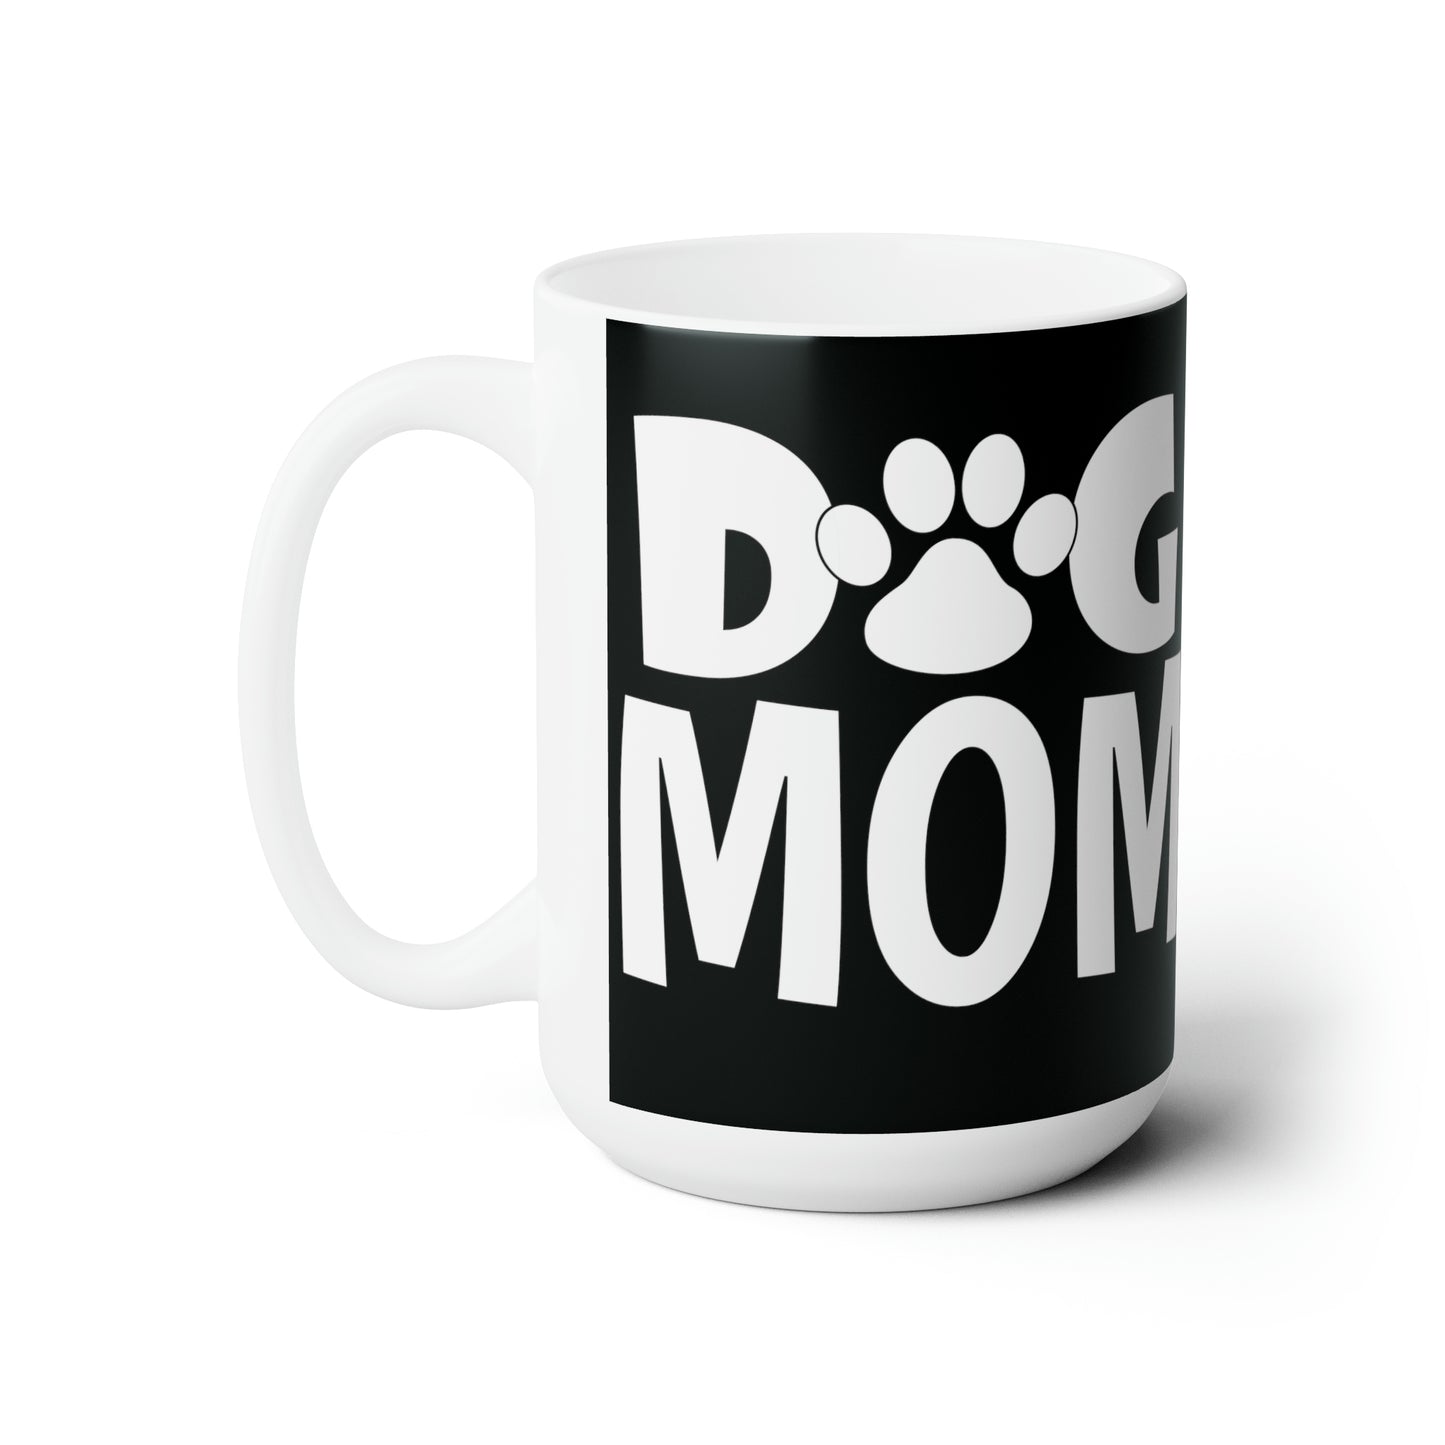 Dog Mom Coffee Mug For Pet Lover Tea Cup For Mother's Day Gift Idea